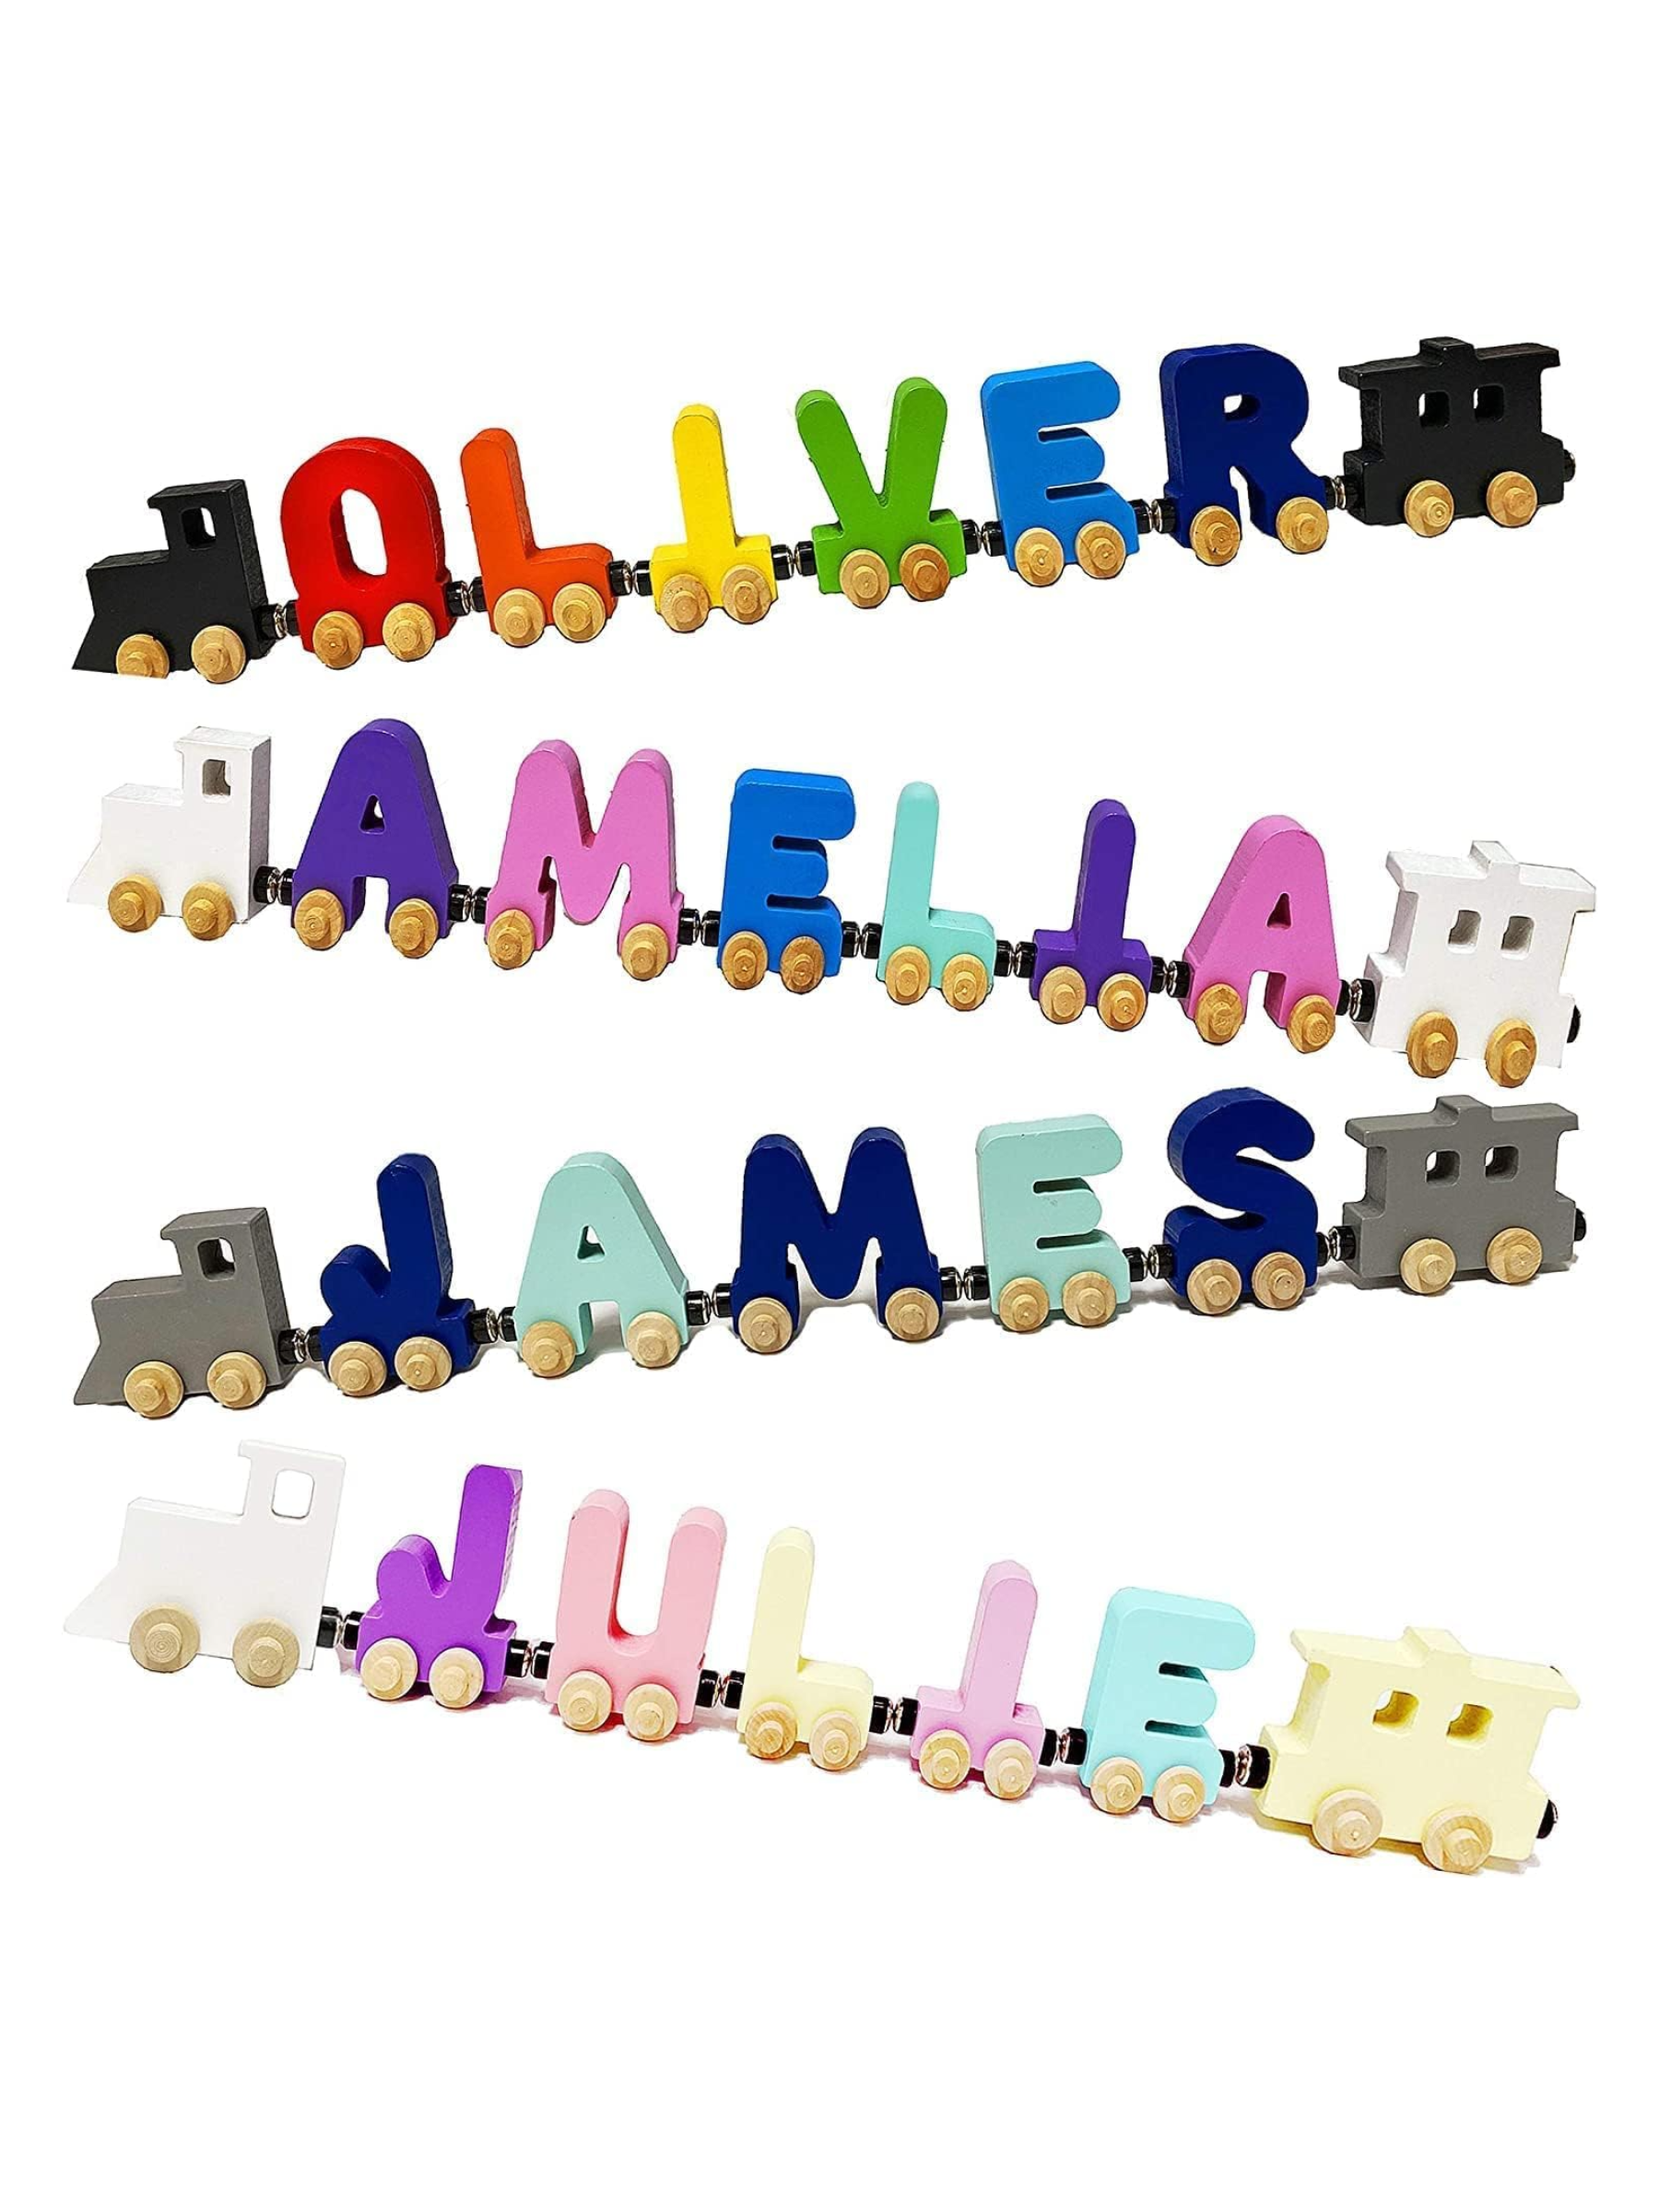 Another affordable personalized gift that’s bound to be a hit, this toy functions as nursery decor, a moving train, and a puzzle. Each piece connects via durable magnets that are easy for tiny hands to manipulate. And in addition to color customizations, you can also add an 8-piece wooden track to expand the possibilities for play. <br> <br> <strong>What our expert says:</strong> “You can never go wrong with a train set for this age, but this personalized version is so much more giftable than your average set. It’s a cute and functional gift that has a high probability of turning into a special keepsake.” — Earley $10, Amazon. <a href="https://www.amazon.com/Wooden-Personalized-Name-Puzzle-Educational/dp/B07YL61SX7">Get it now!</a><p>Sign up for today’s biggest stories, from pop culture to politics.</p><a href="https://www.glamour.com/newsletter/news?sourceCode=msnsend">Sign Up</a>